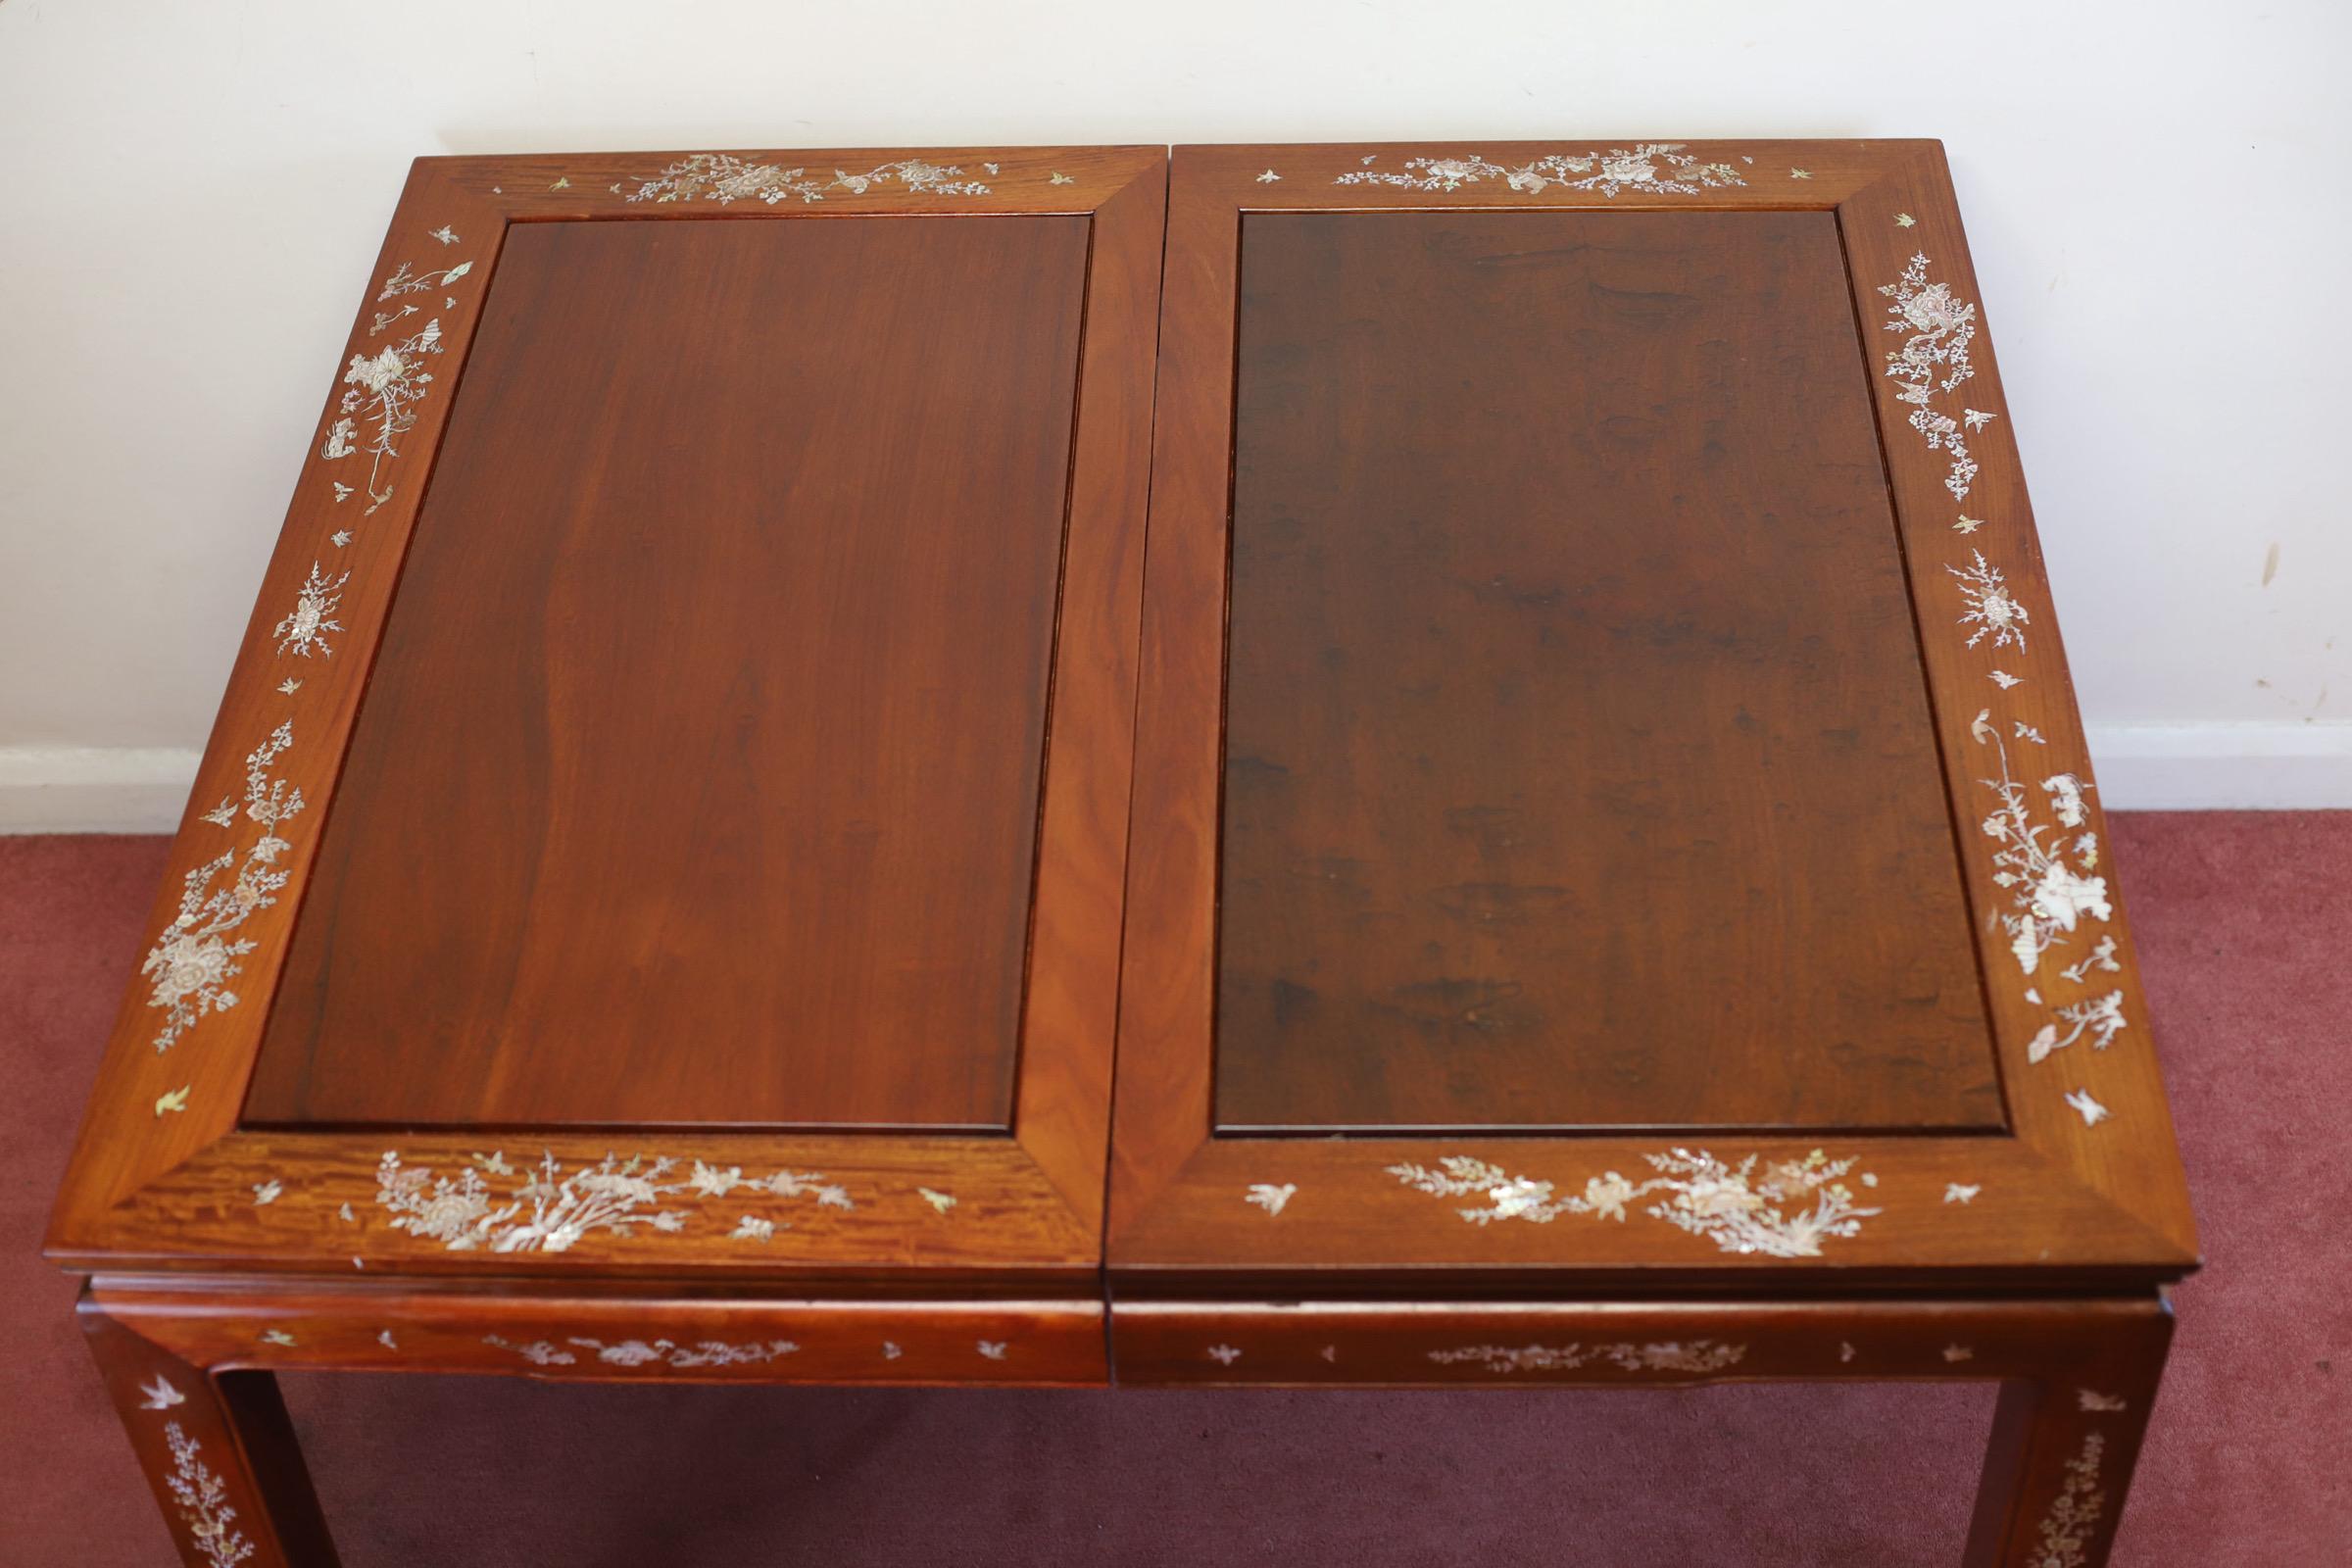 We delight to offer for sale this stunning set of south East Asian hardwood and mother-of-pearl inset extending dining table, and eight chairs en suite, 20th century; the table with cleated panel top decorated with birds and foliage, with conforming